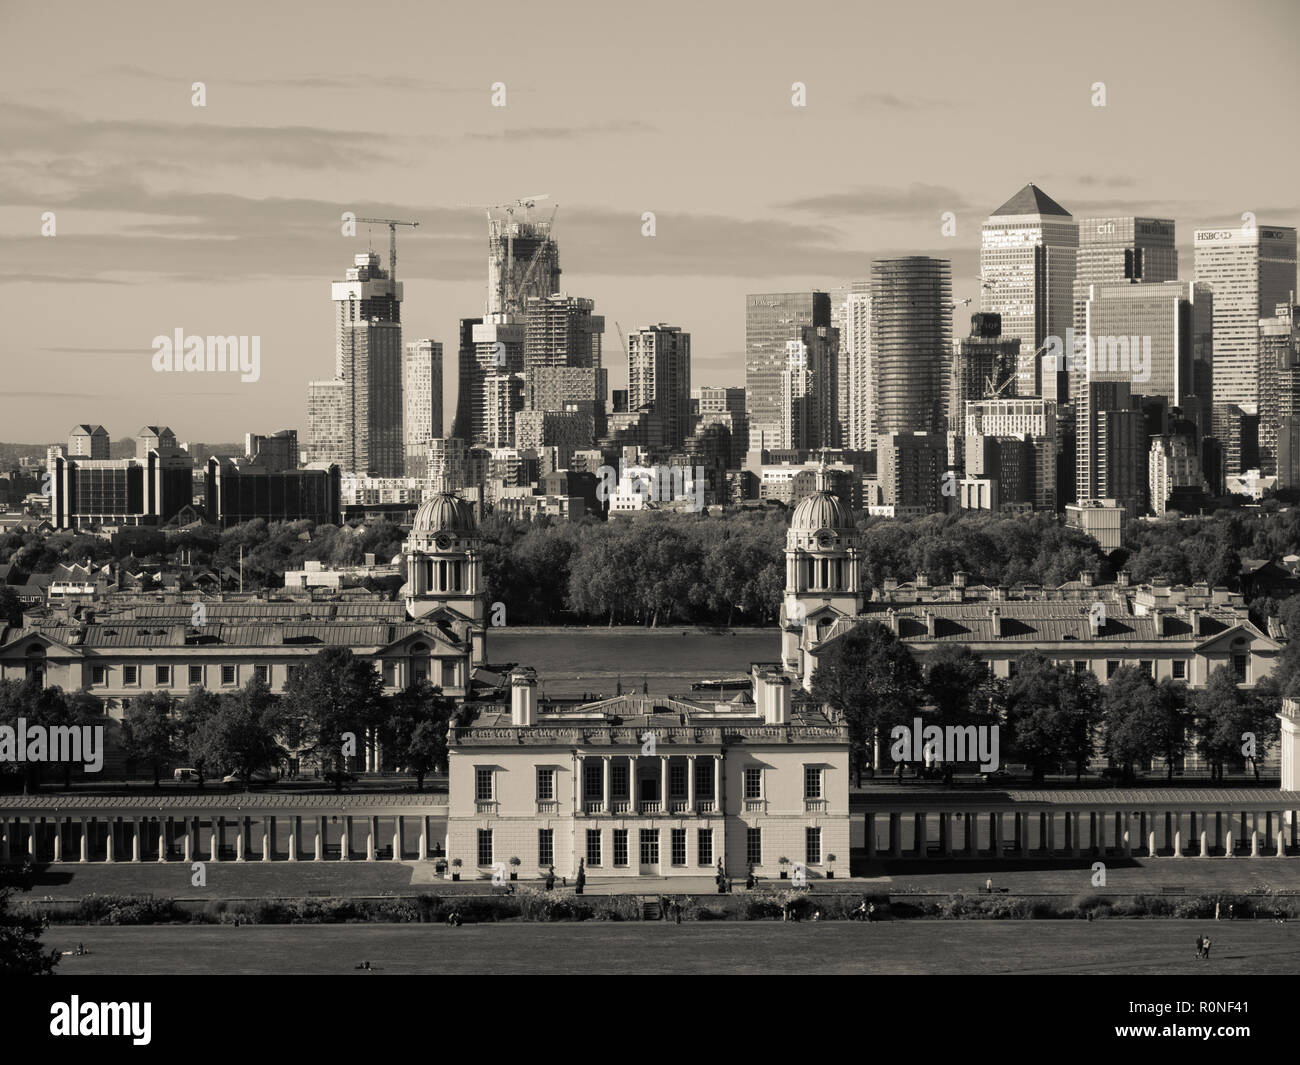 Vista dal Royal Observatory, di Canary Wharf, London Docklands, con Queens House e Old Royal Navel College, Greenwich, Londra, Inghilterra. Foto Stock